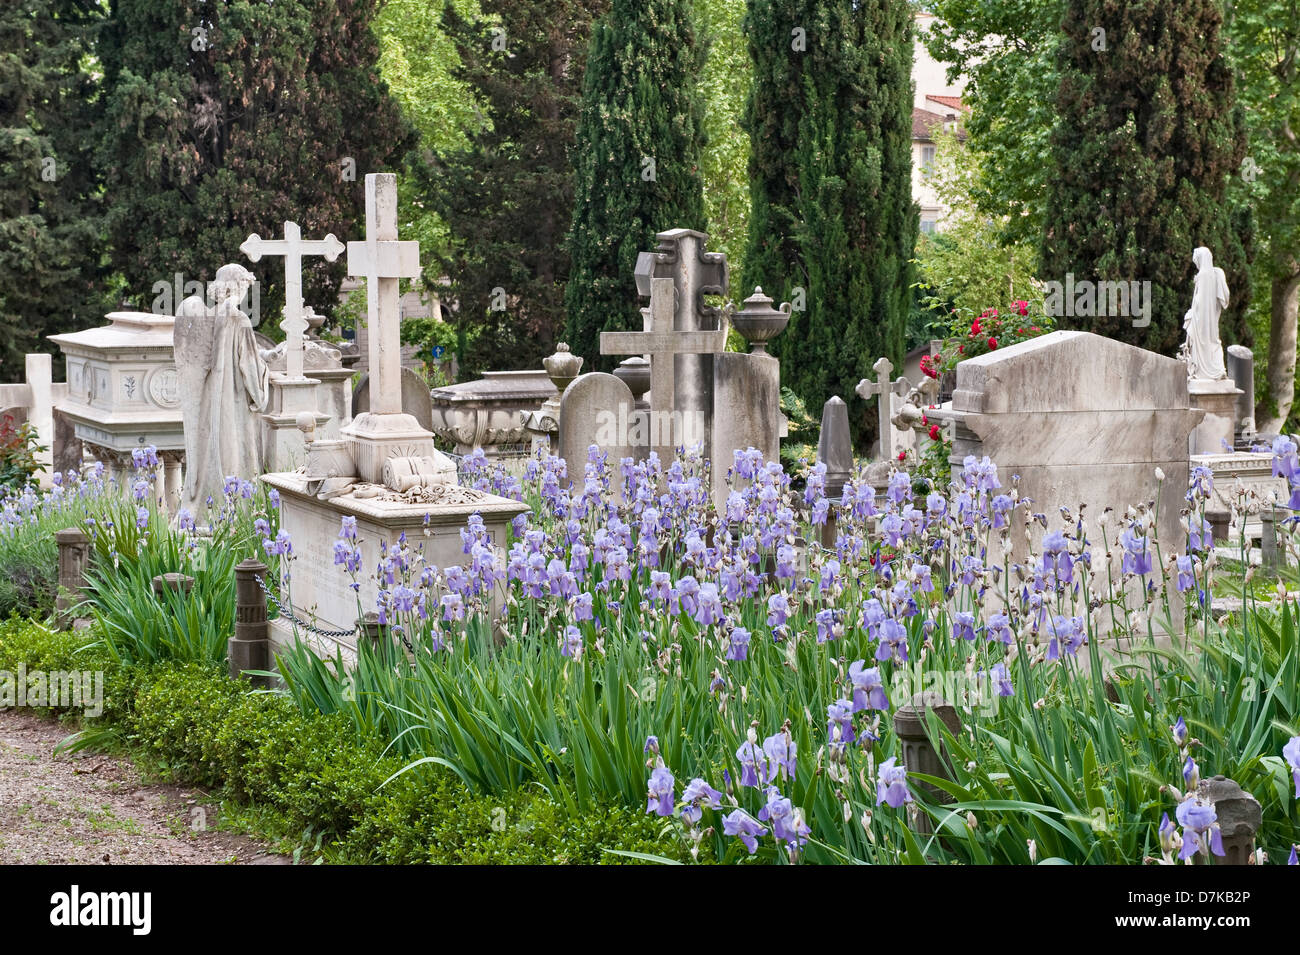 Memorials and gravestones in the English Cemetery, Florence, Italy, founded 1827. Sweet iris (Iris pallida, Dalmatian Iris) flowers among the graves Stock Photo